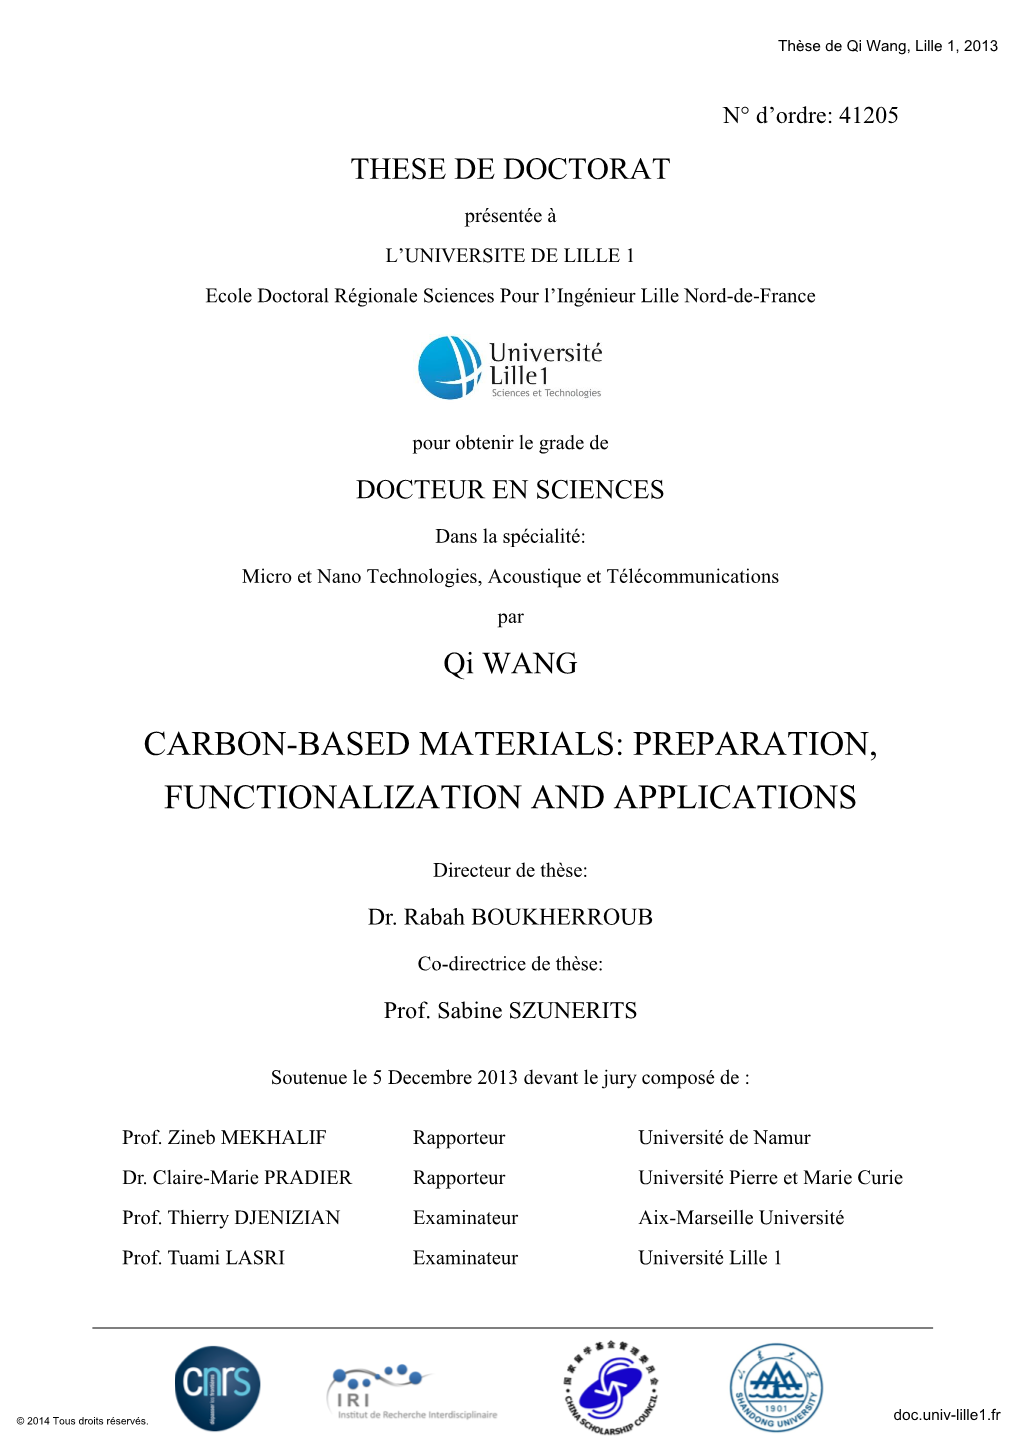 Carbon-Based Materials: Preparation, Functionalization and Applications